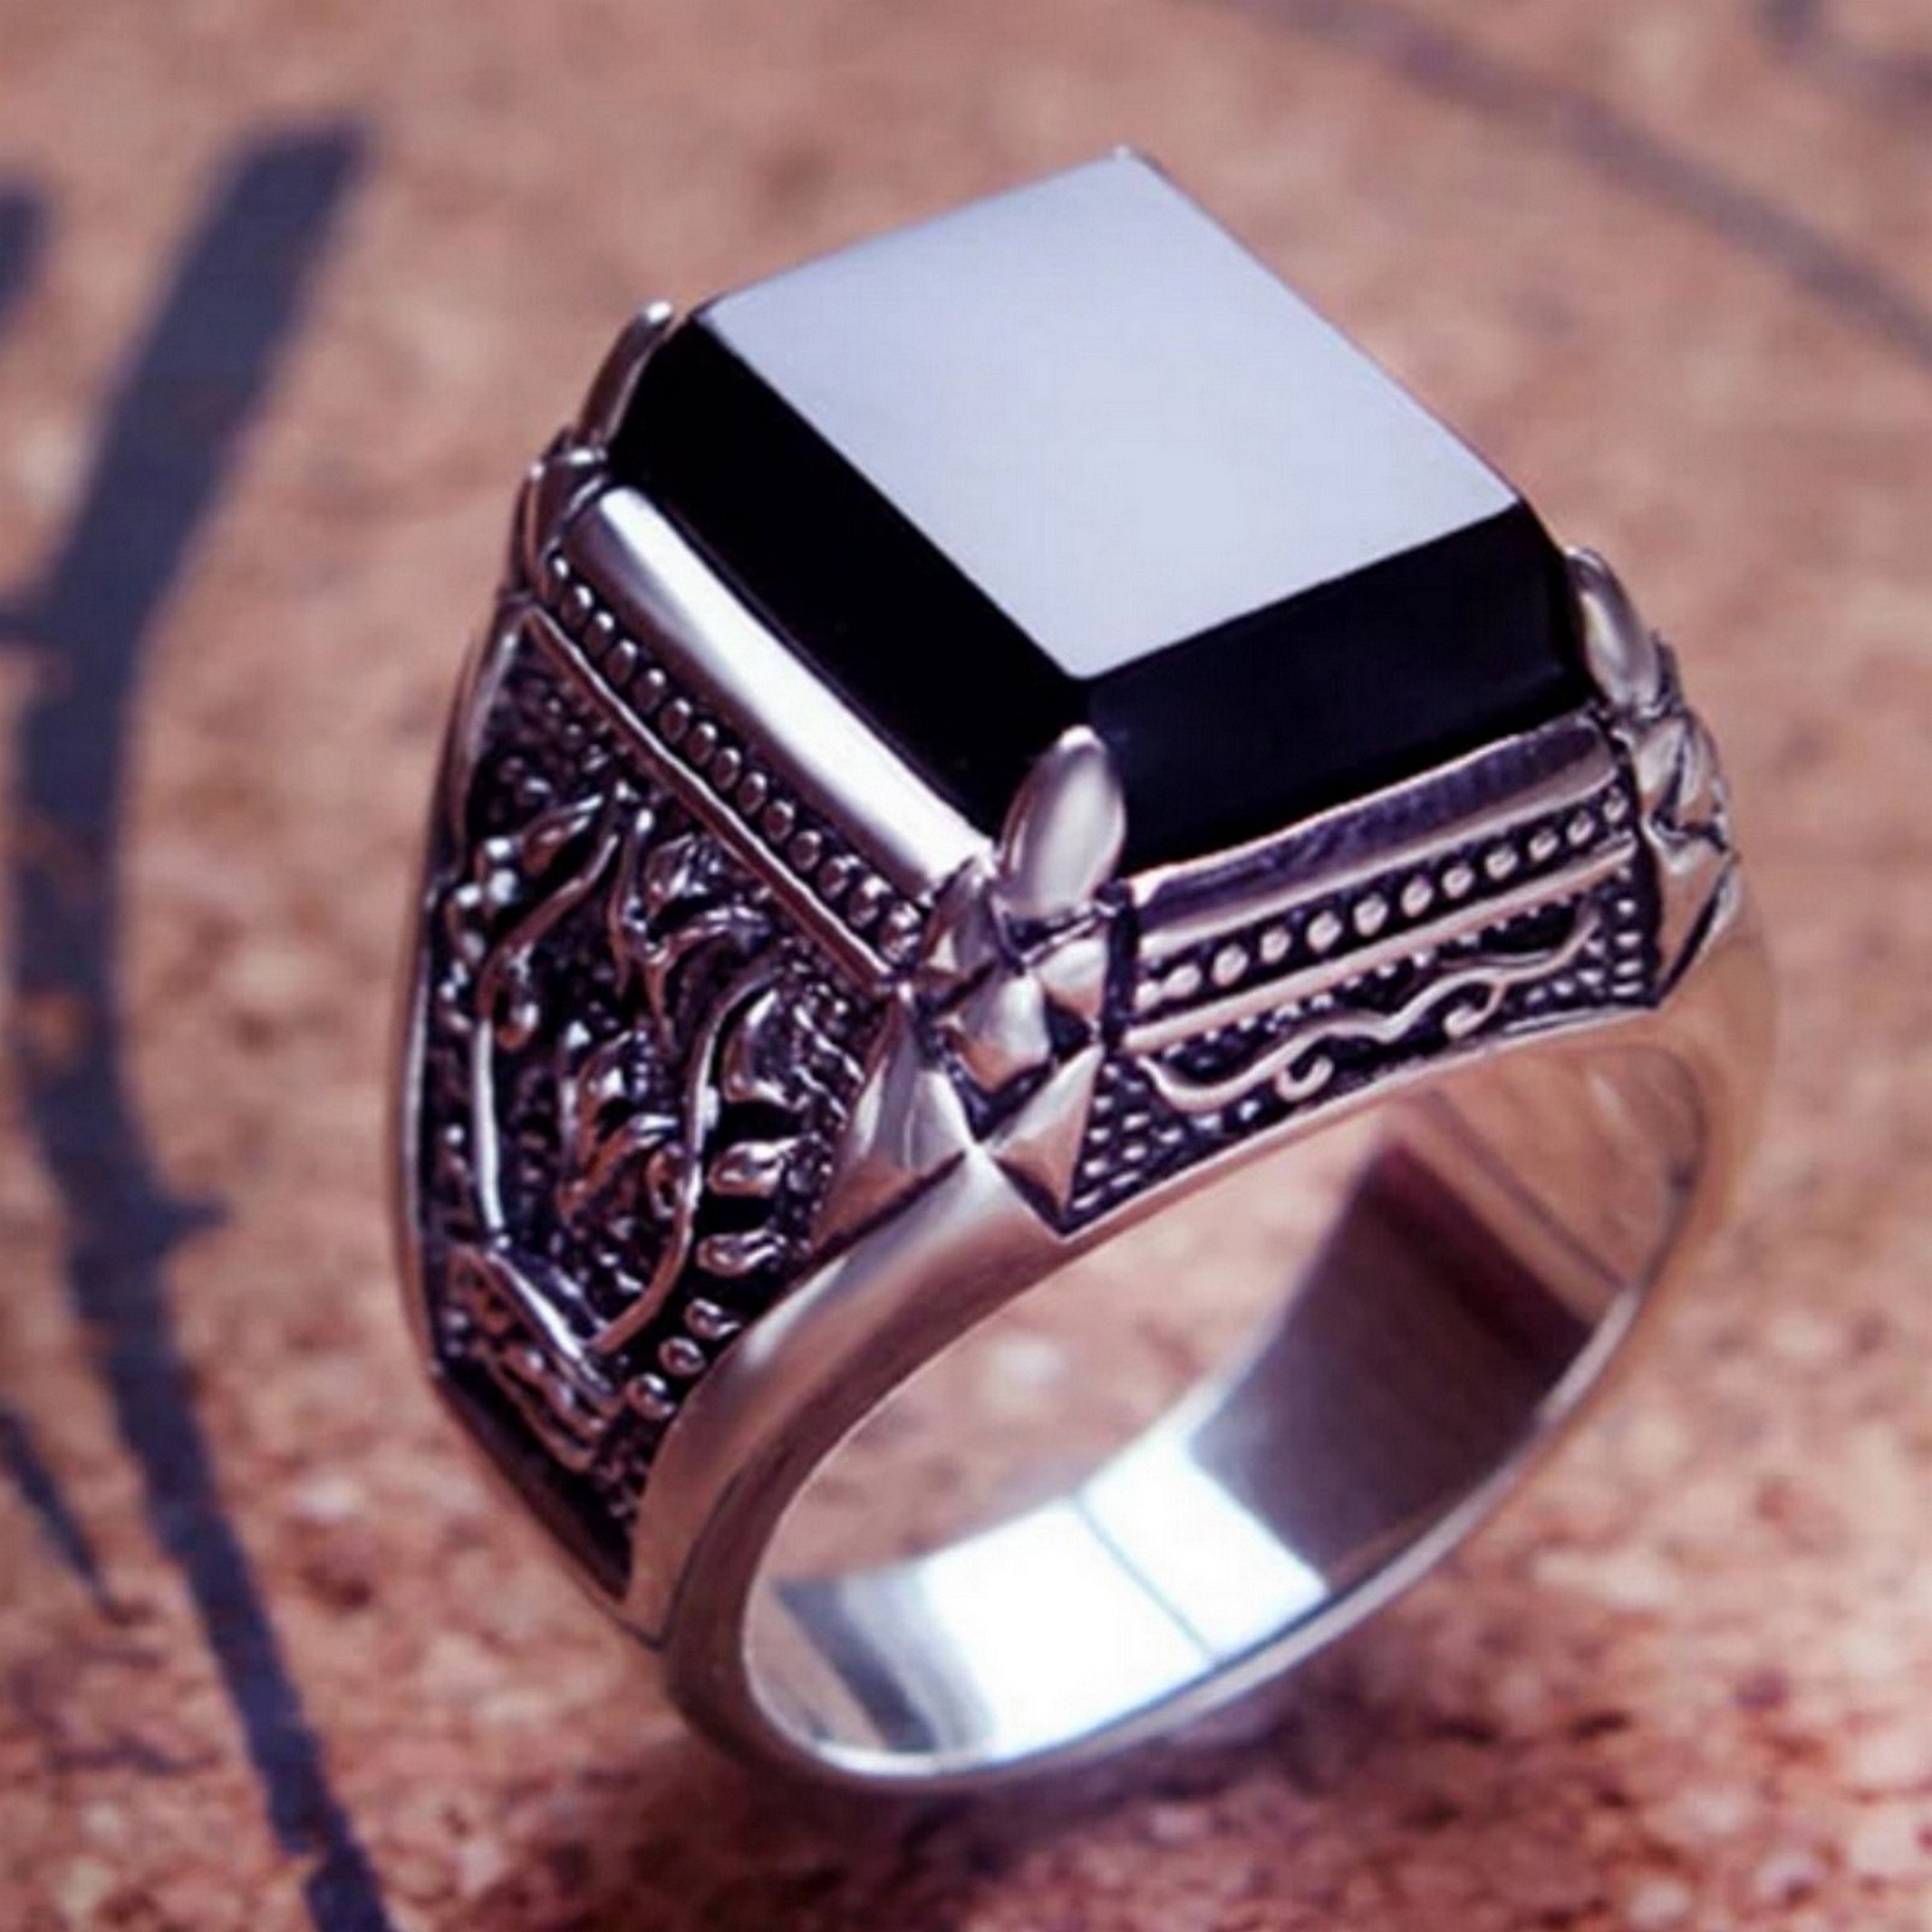 Zancan silver ring with black stone.